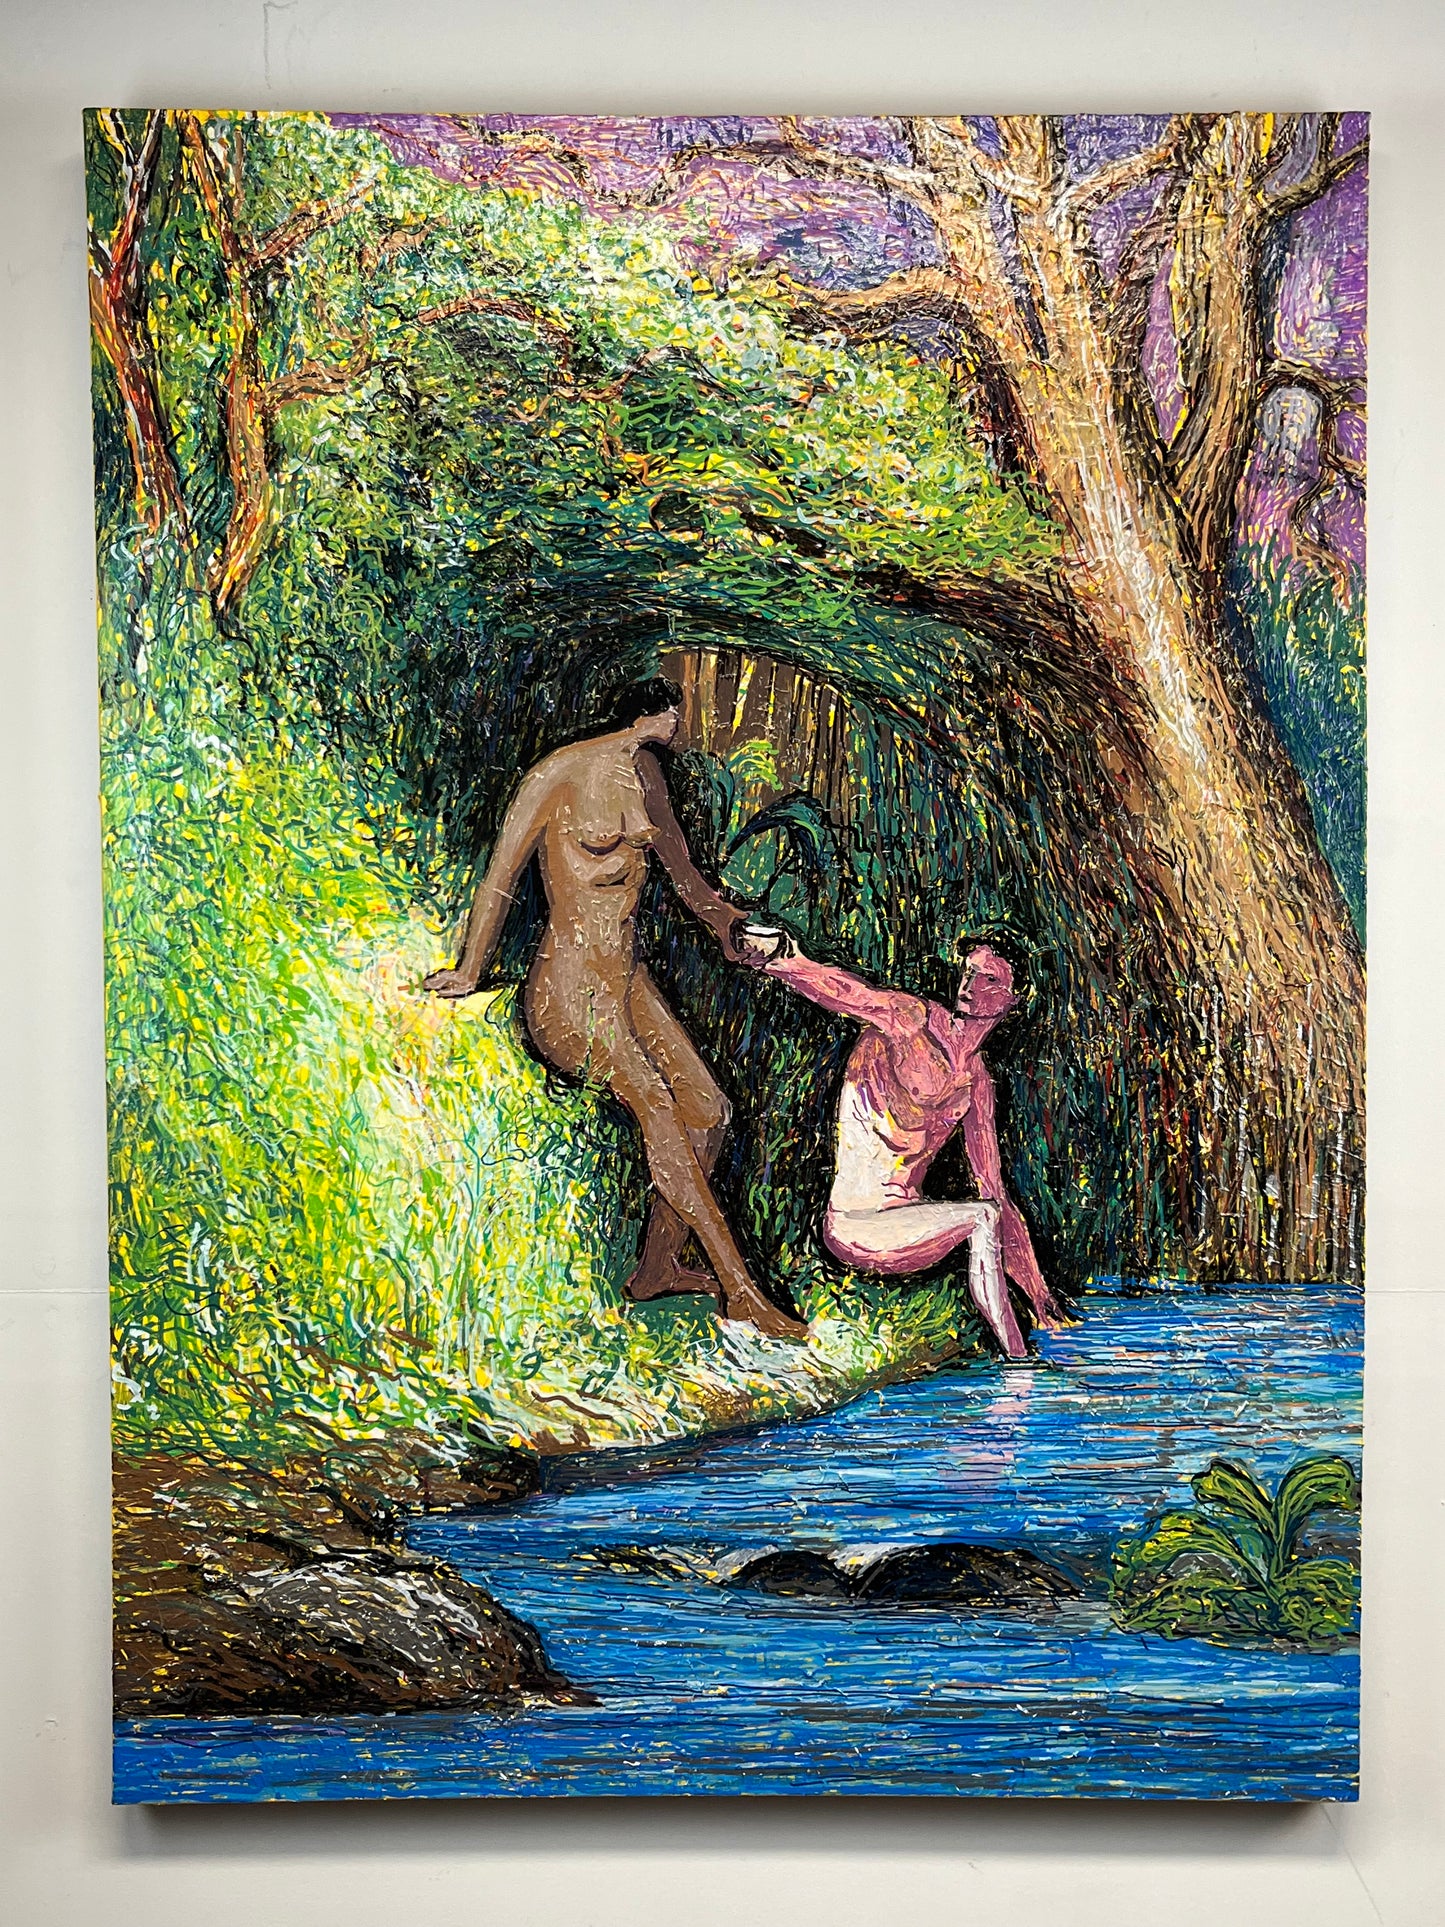 After Gustave Dore's Paradise Lost. Enamel and Oil Markers on Canvas. 36" x 48". John Kline Artwork. Adam and Eve Modern Painting